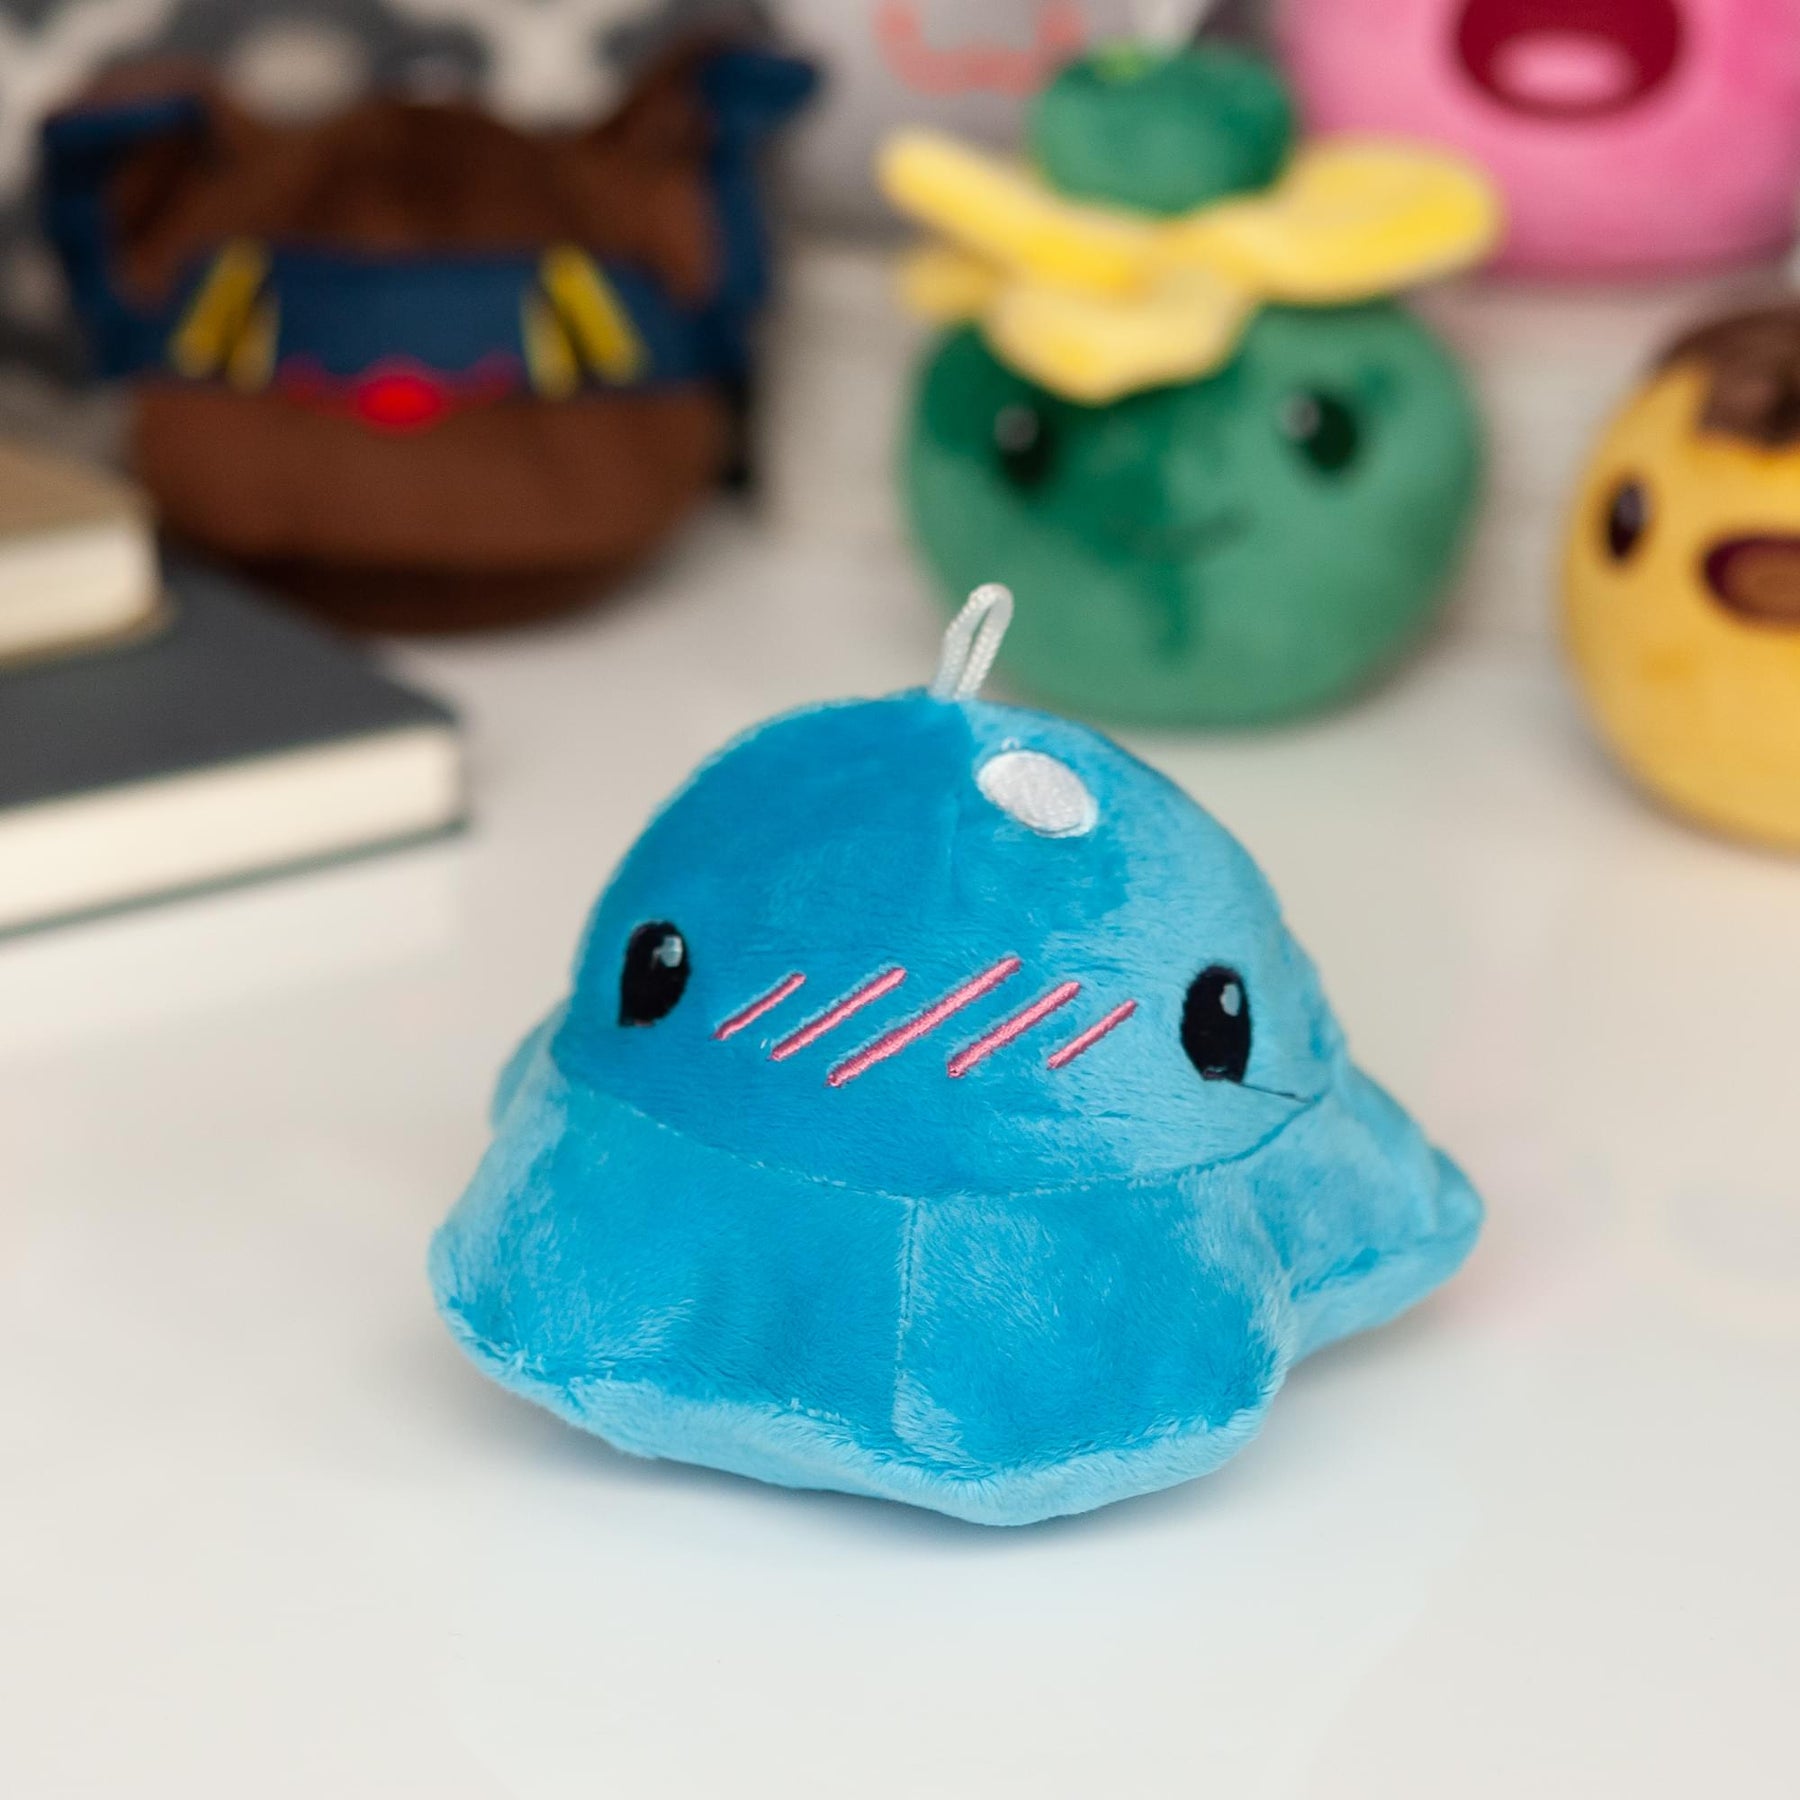 Slime Rancher Puddle Slime Plush Collectible | Soft Plush Doll | 4-Inch Tall